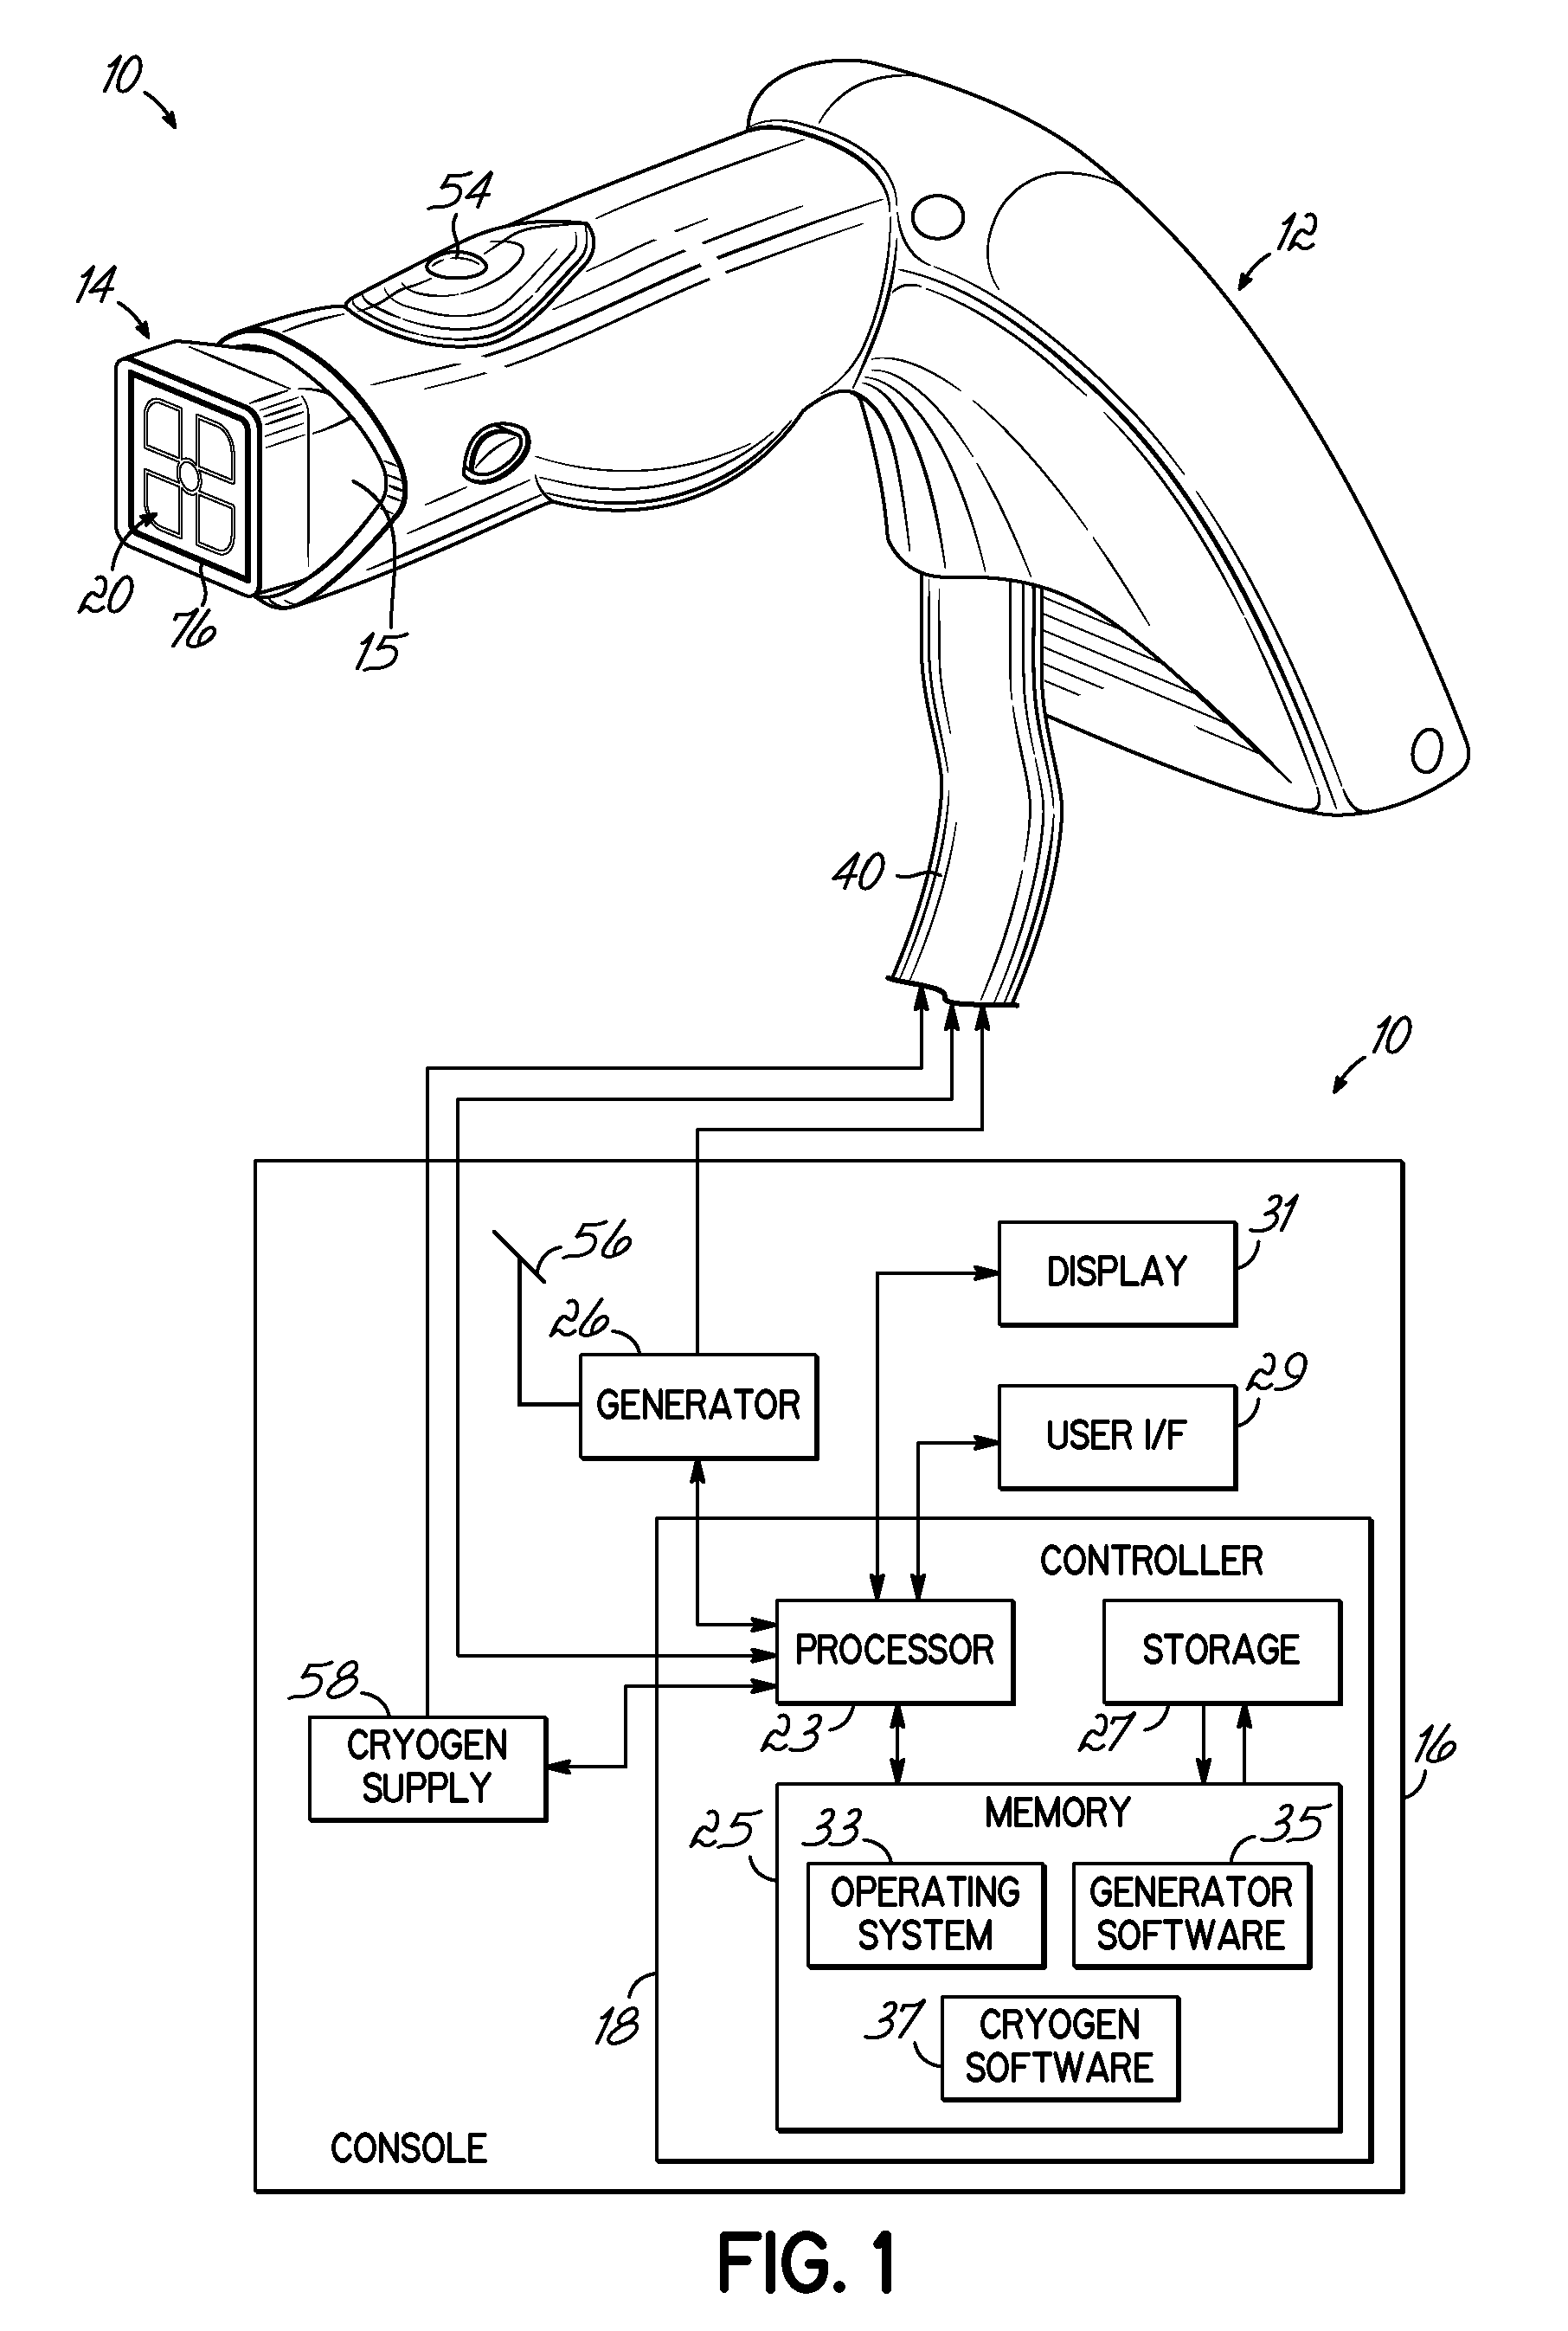 Tissue treatment apparatus and systems with pain mitigation and methods for mitigating pain during tissue treatments